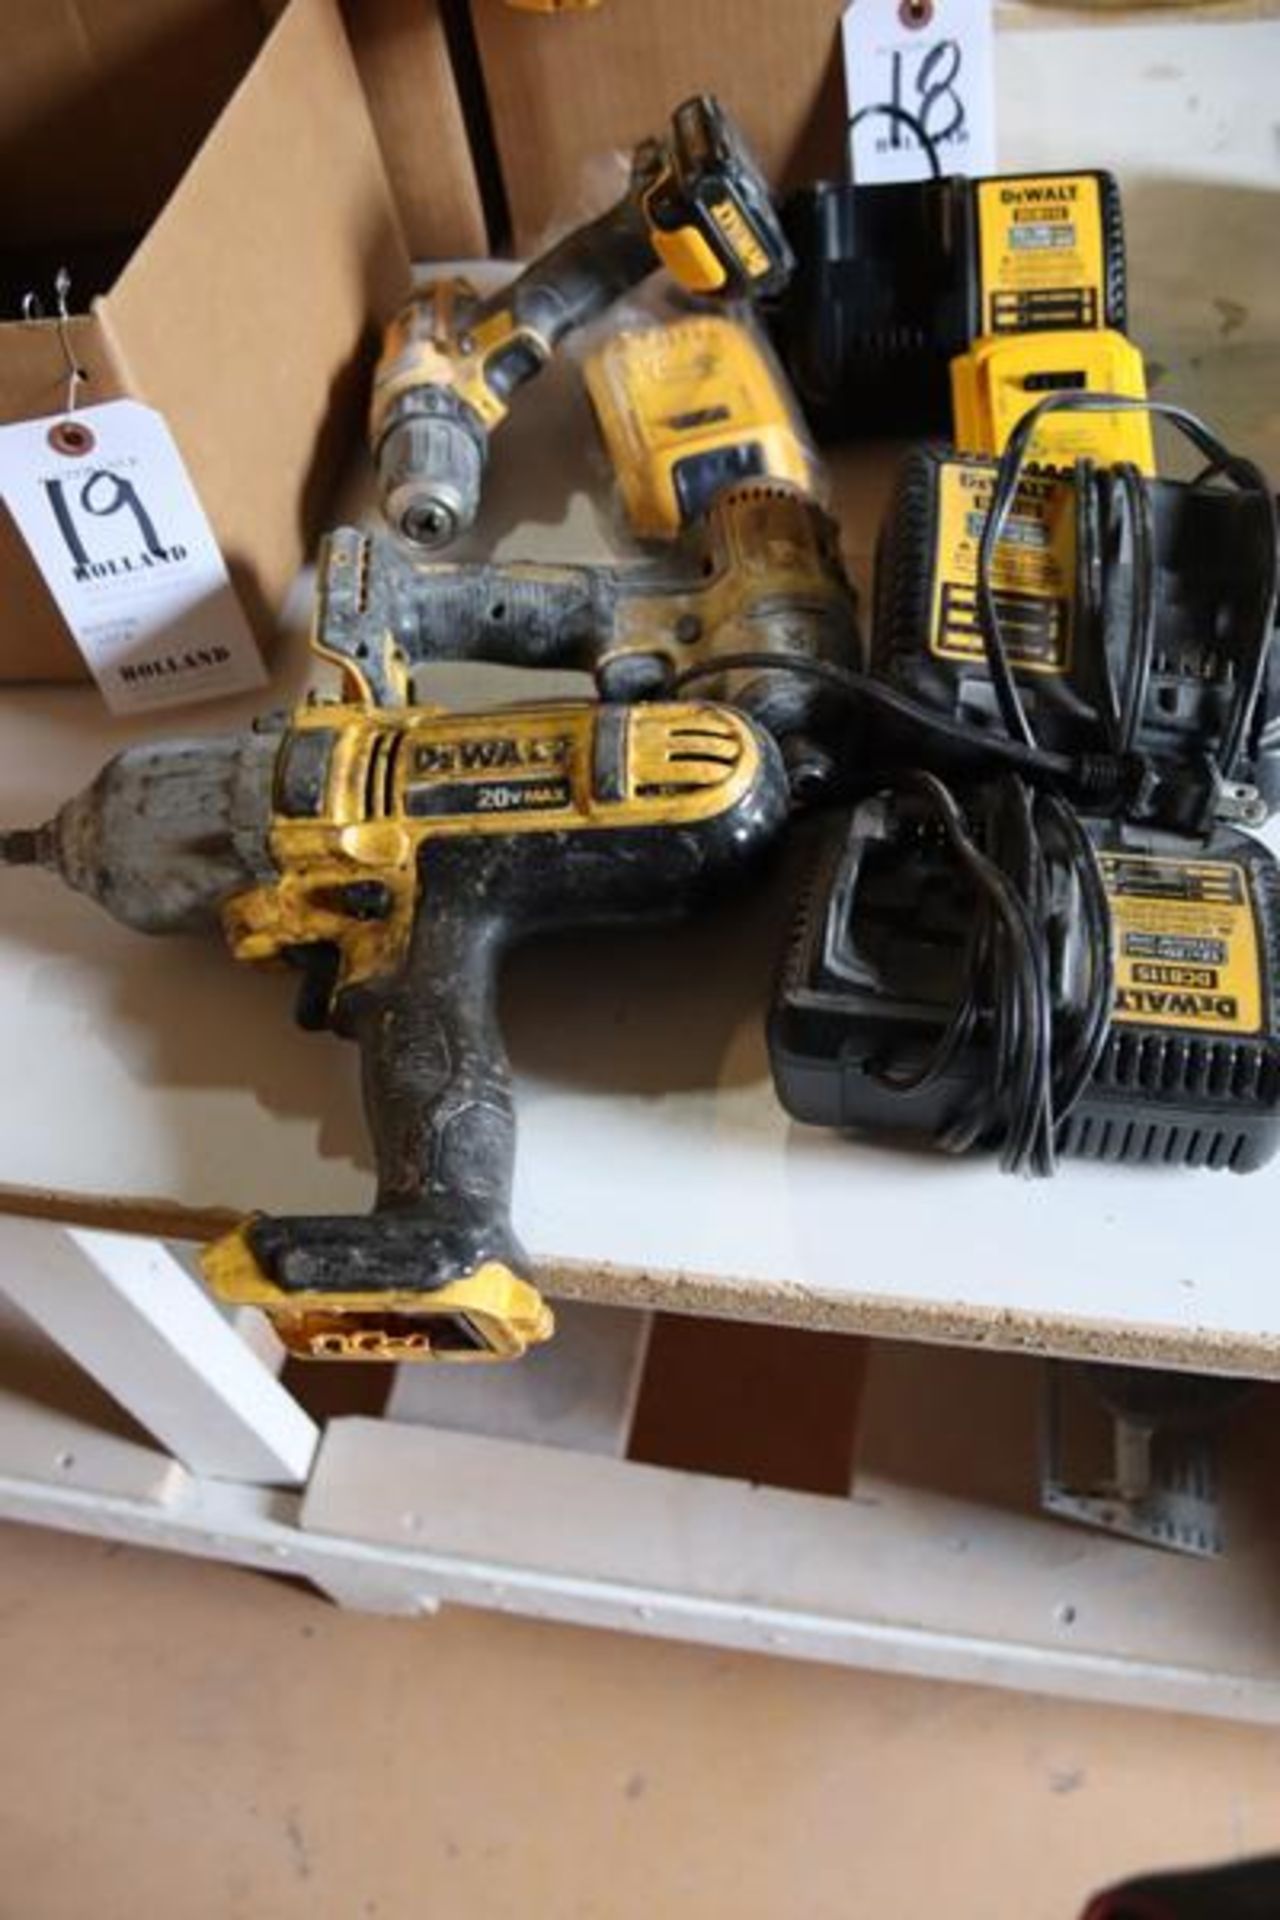 (3) DeWalt Battery Tools, (3) Chargers, (2) New Batteries